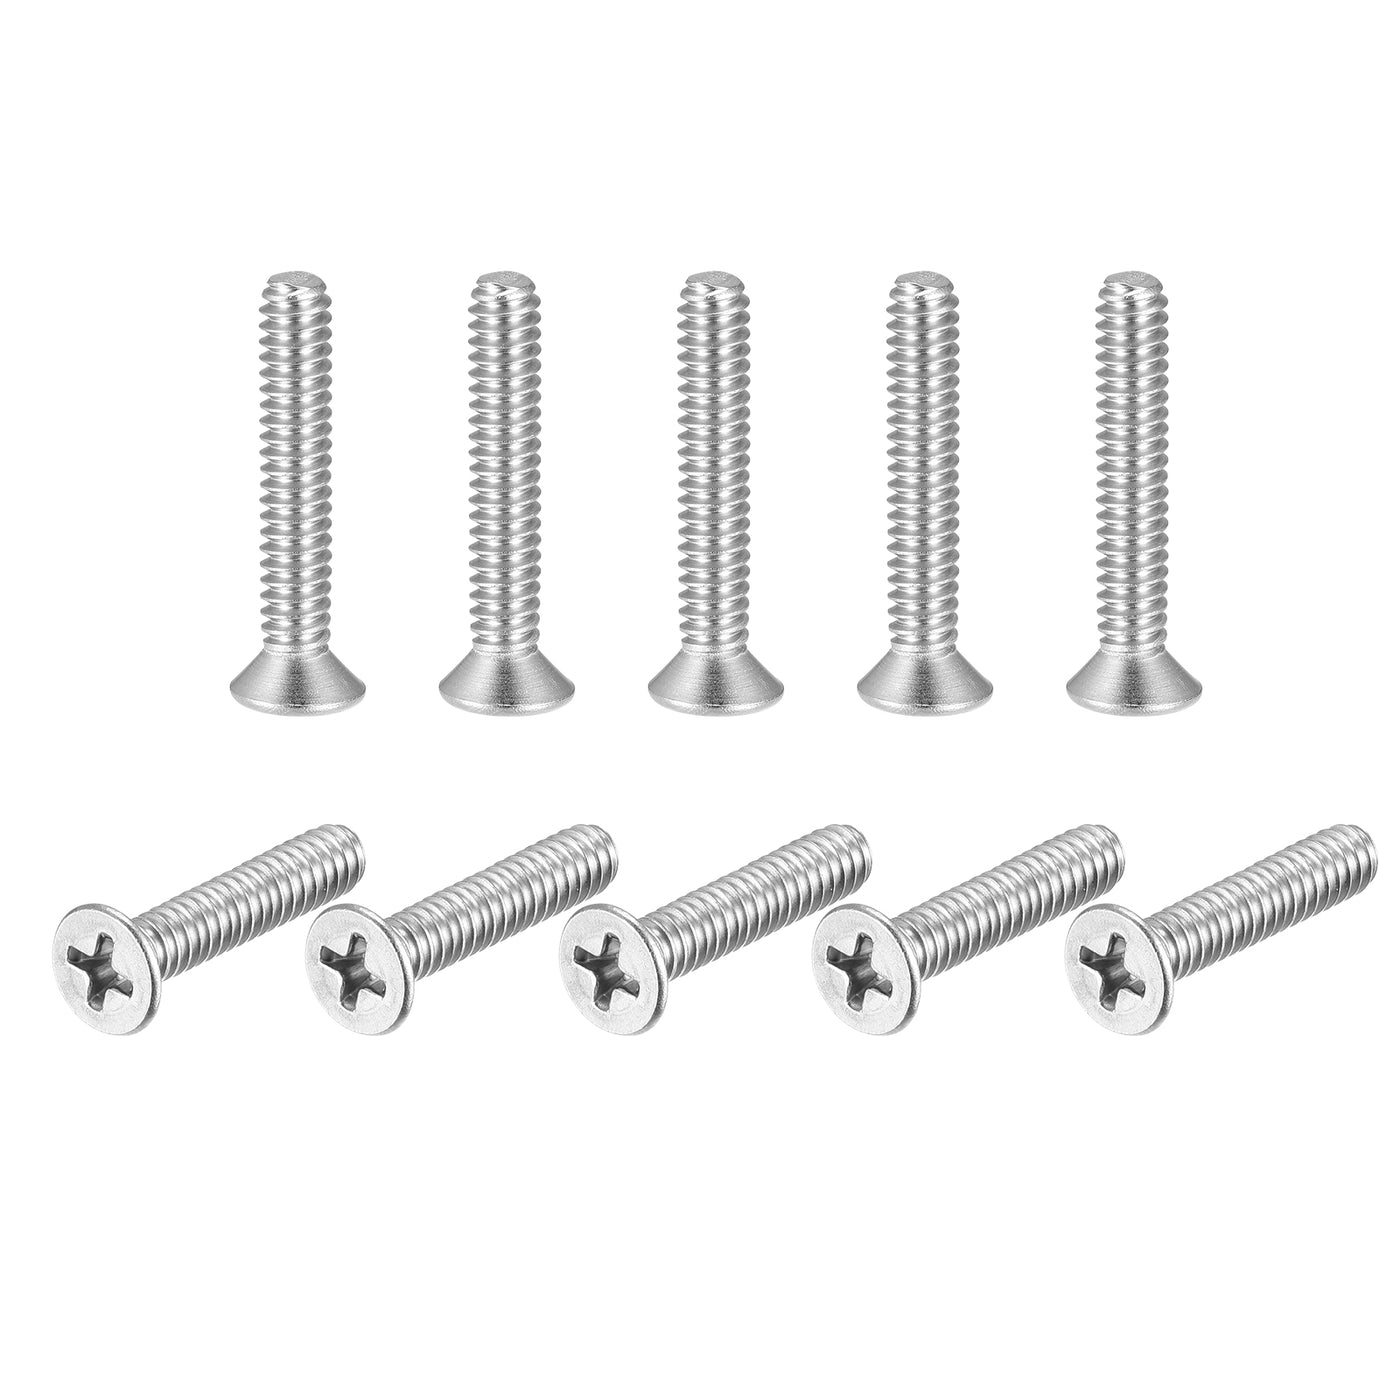 uxcell Uxcell 10#-24x1" Flat Head Machine Screws Phillips 304 Stainless Steel Bolts 60pcs